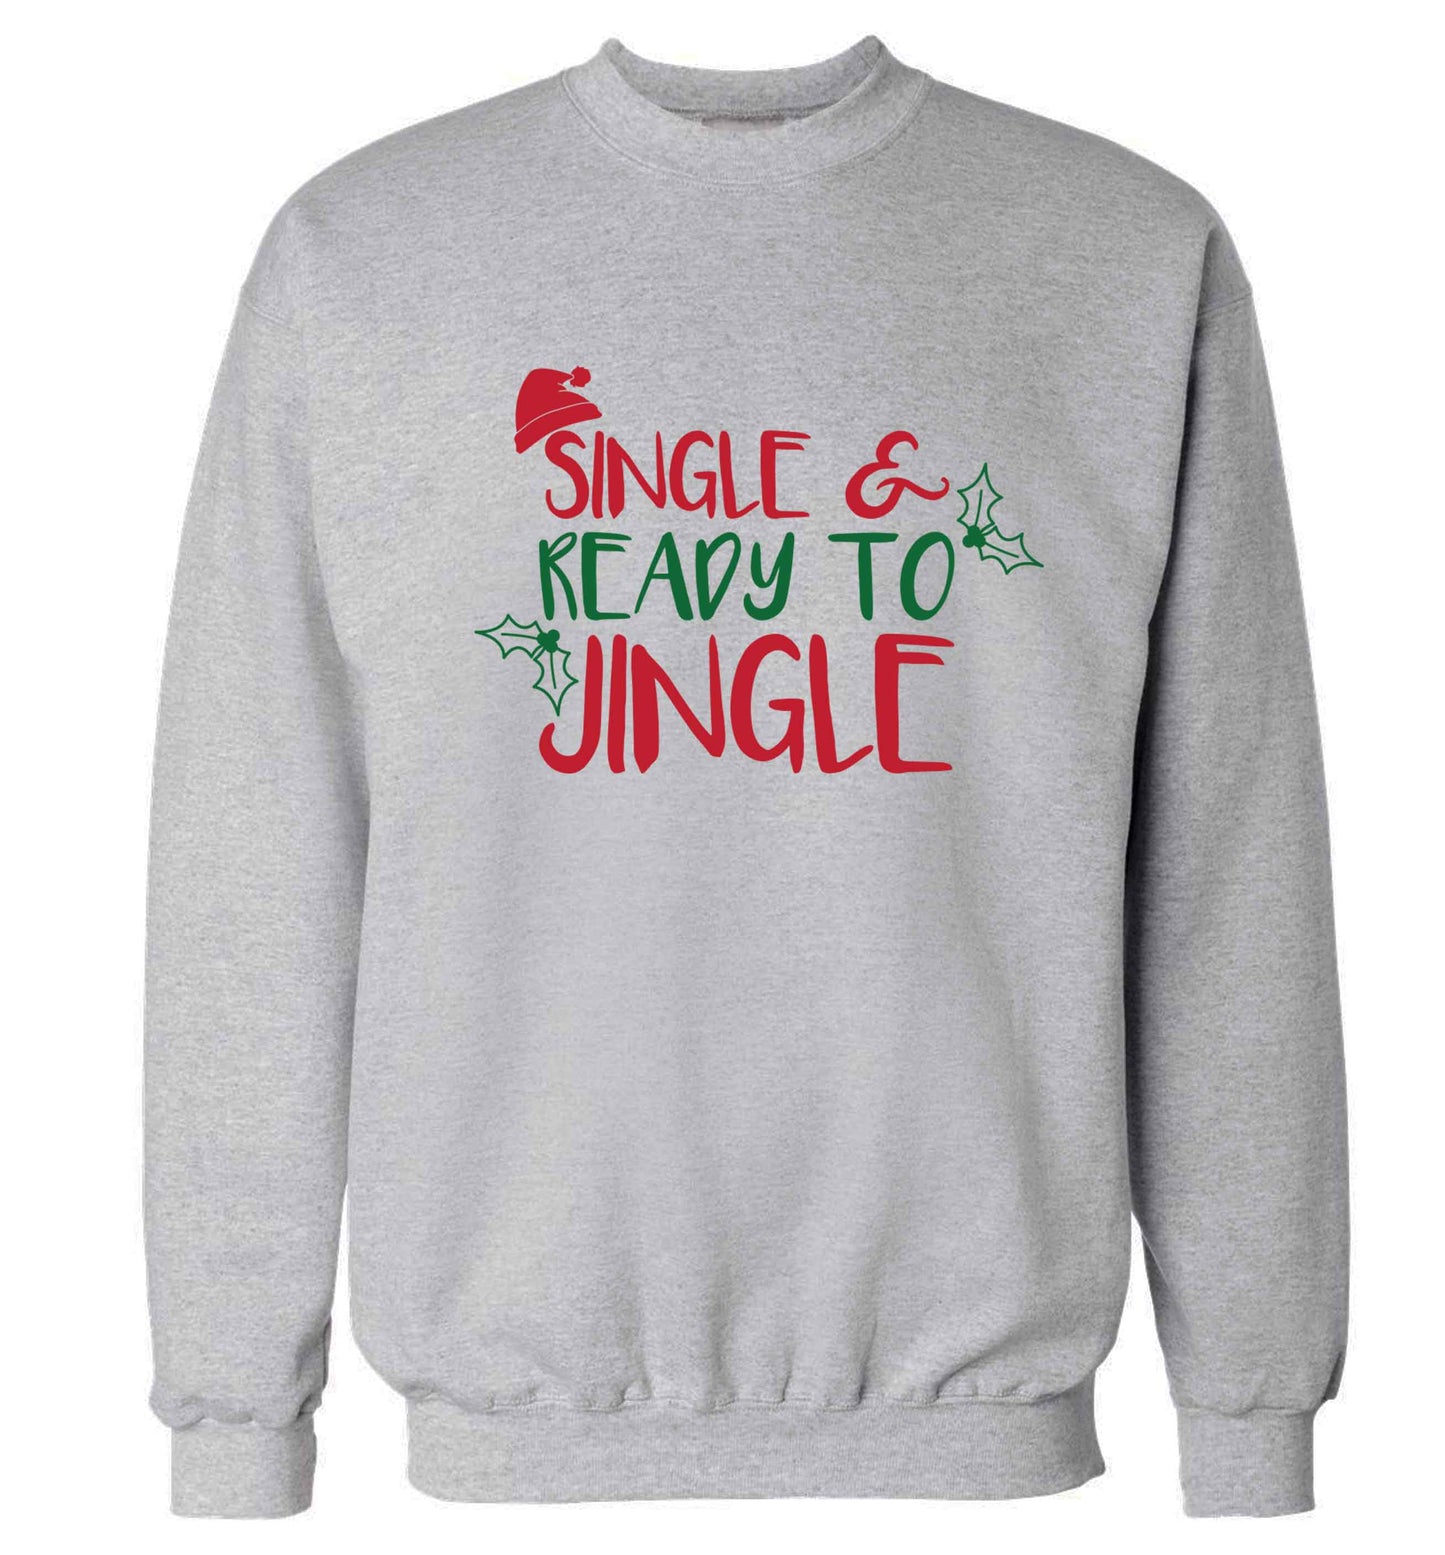 Single and ready to jingle Adult's unisex grey Sweater 2XL